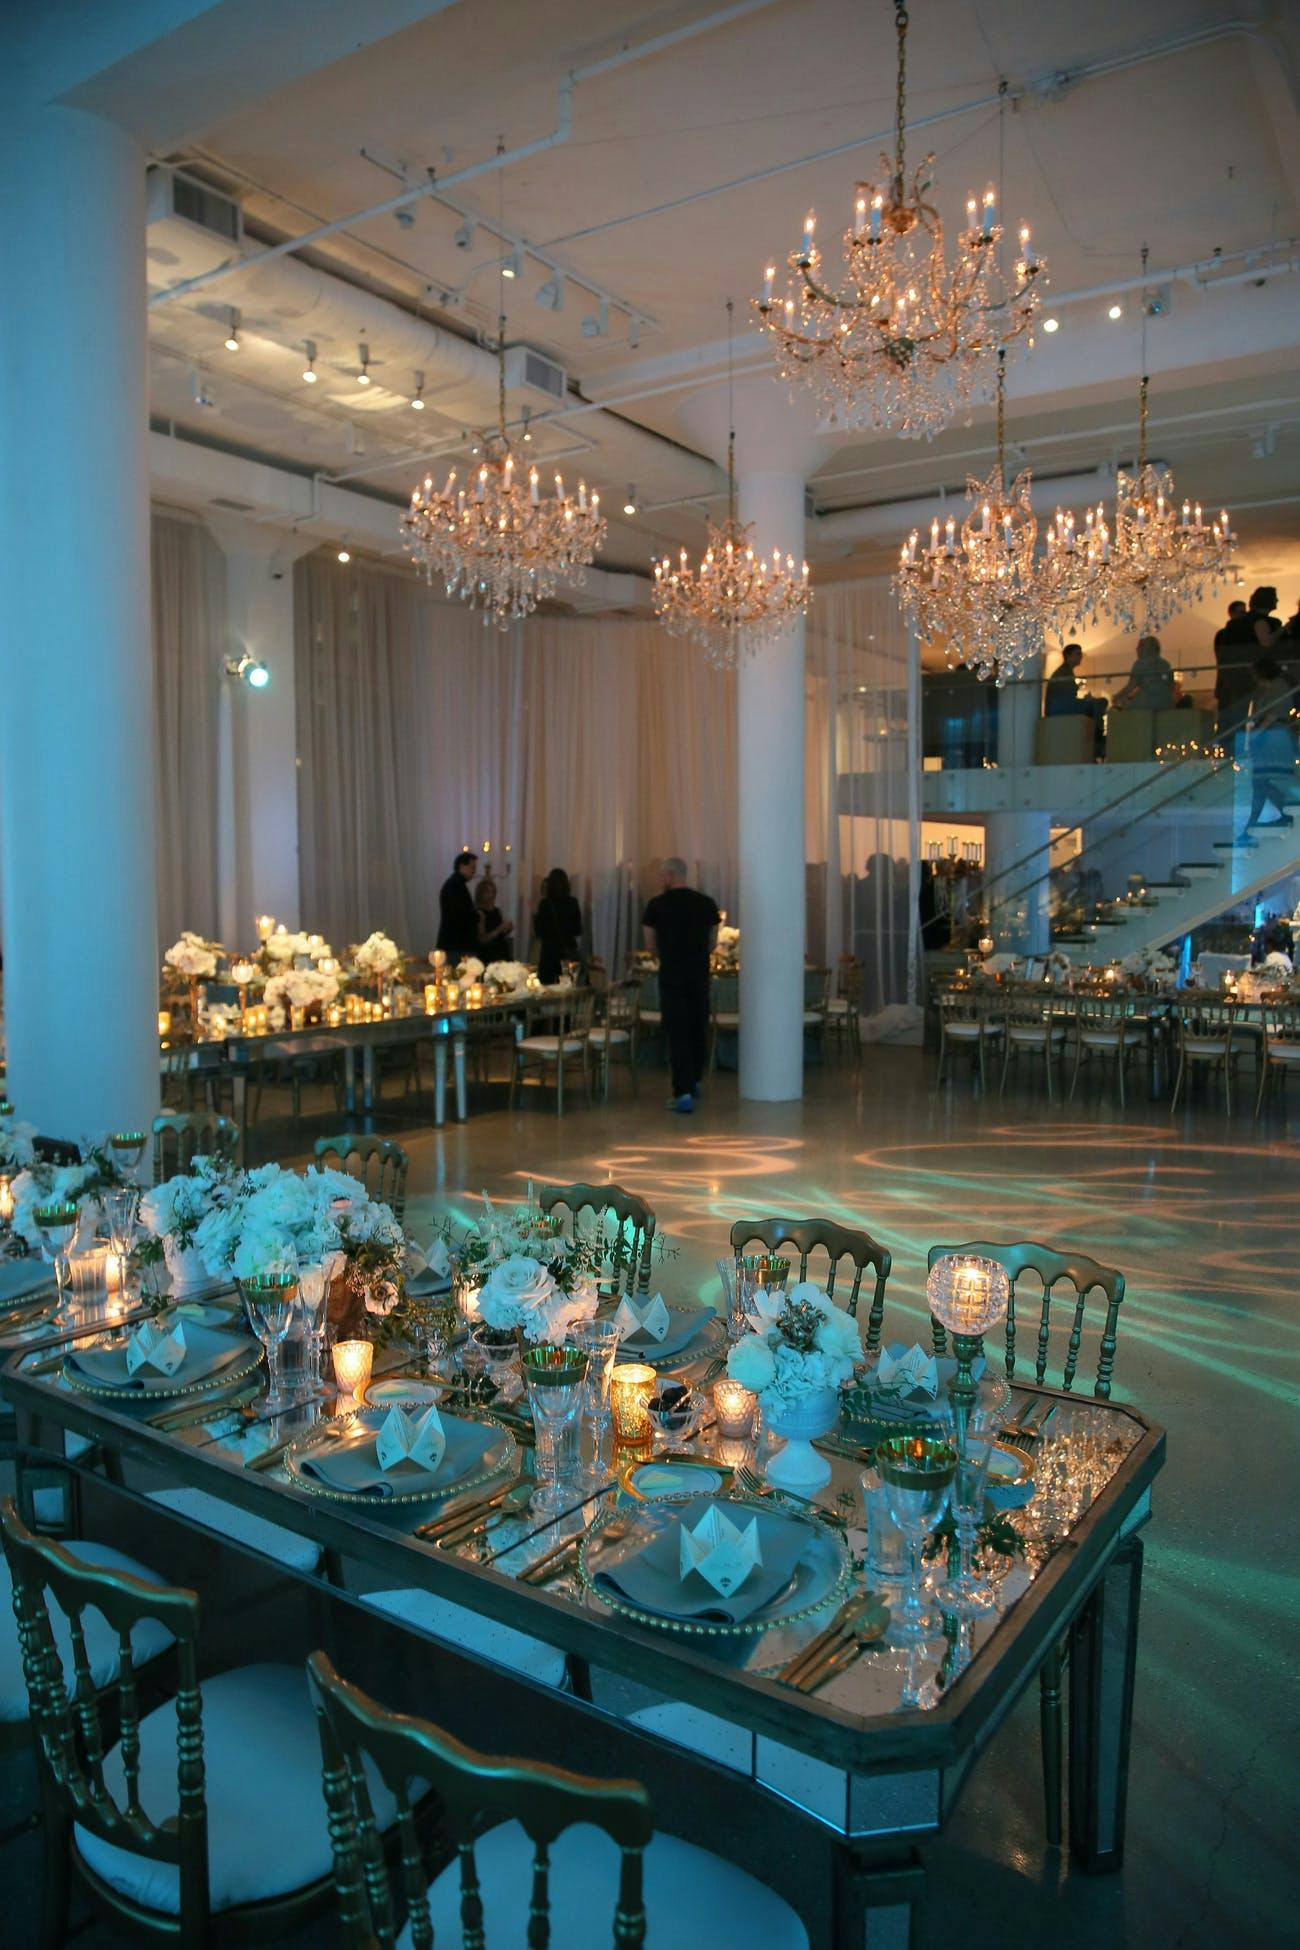 Beautiful Room with Glass Chandeliers and a Blue Hue